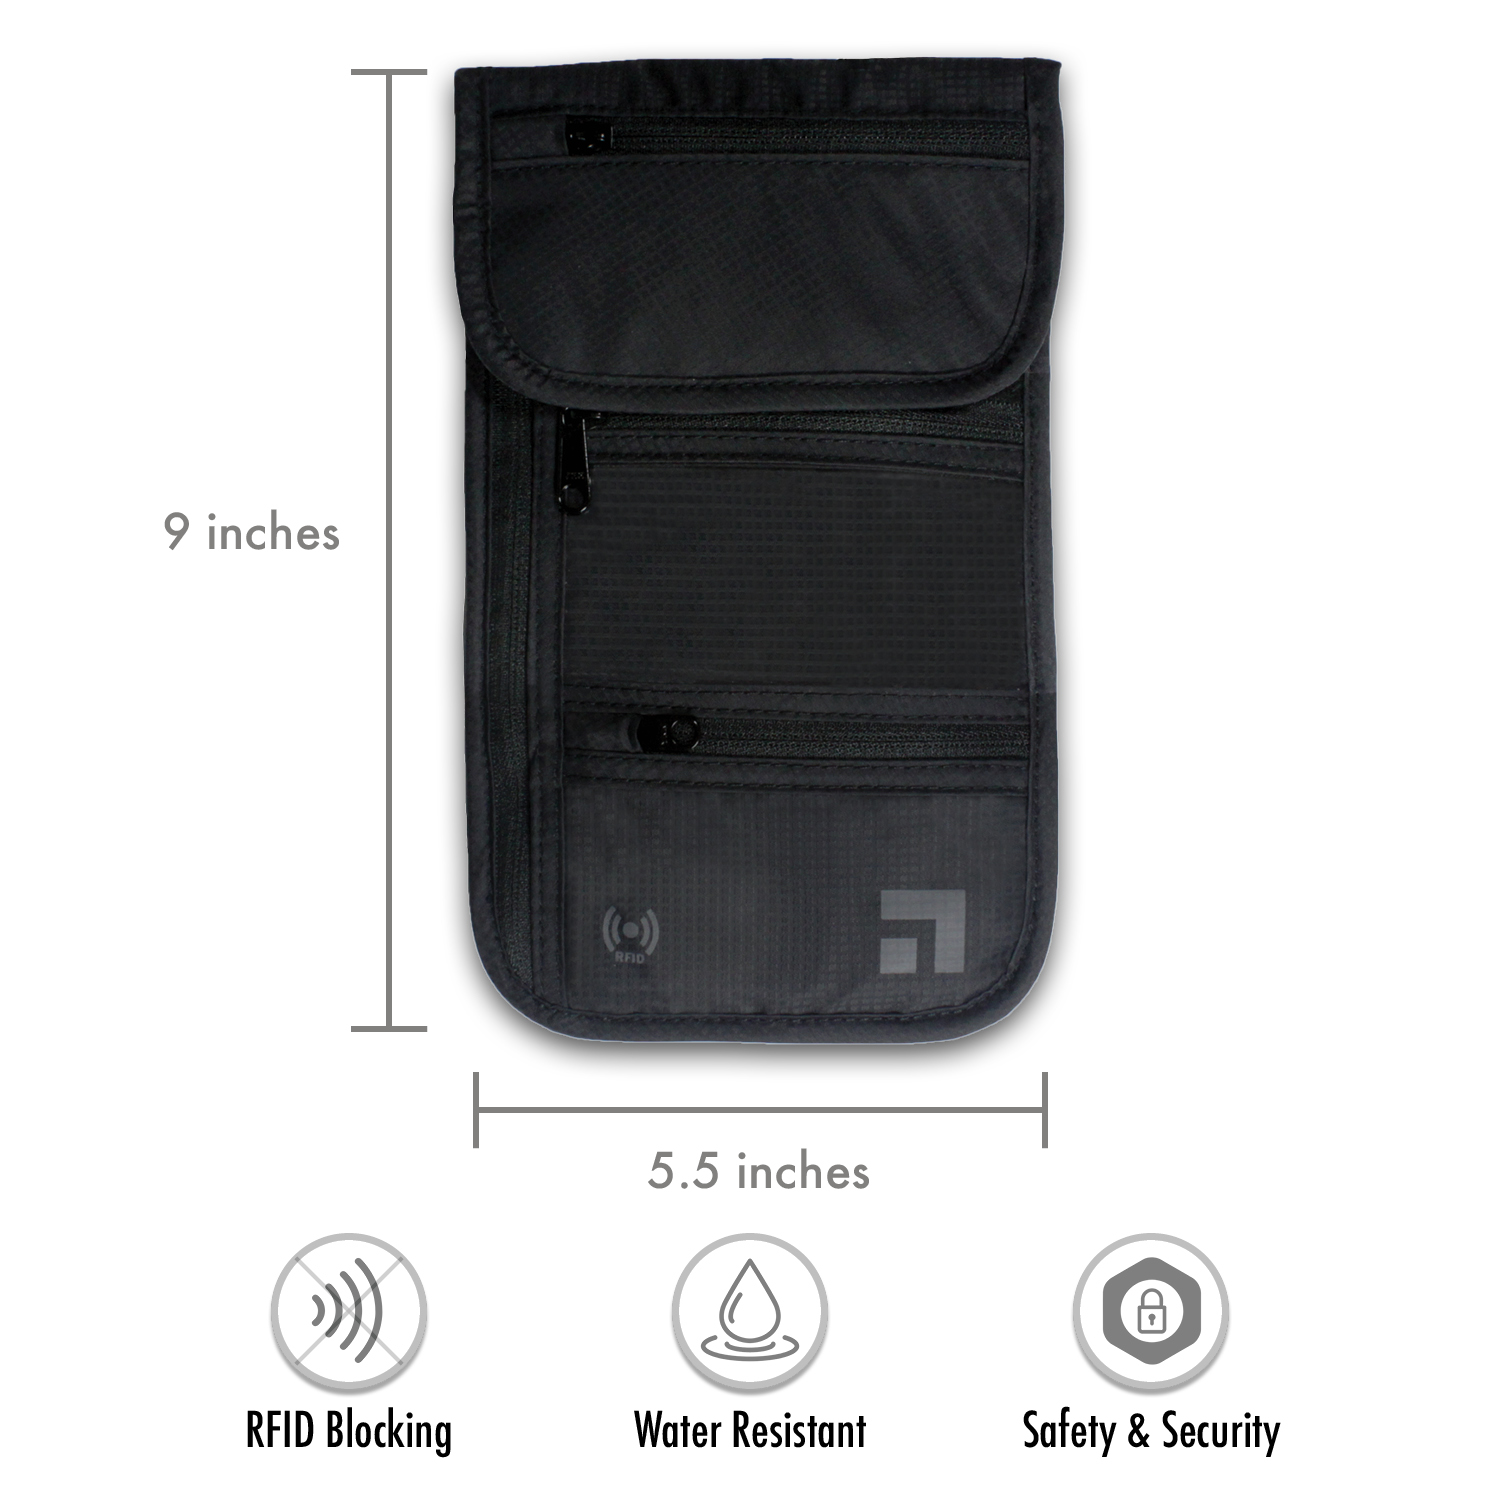 Slate Travel Neck Wallet - RFID Blocking Passport Holder - Waterproof Traveling Pouch - Includes 2 Different Sized Straps … - image 2 of 5